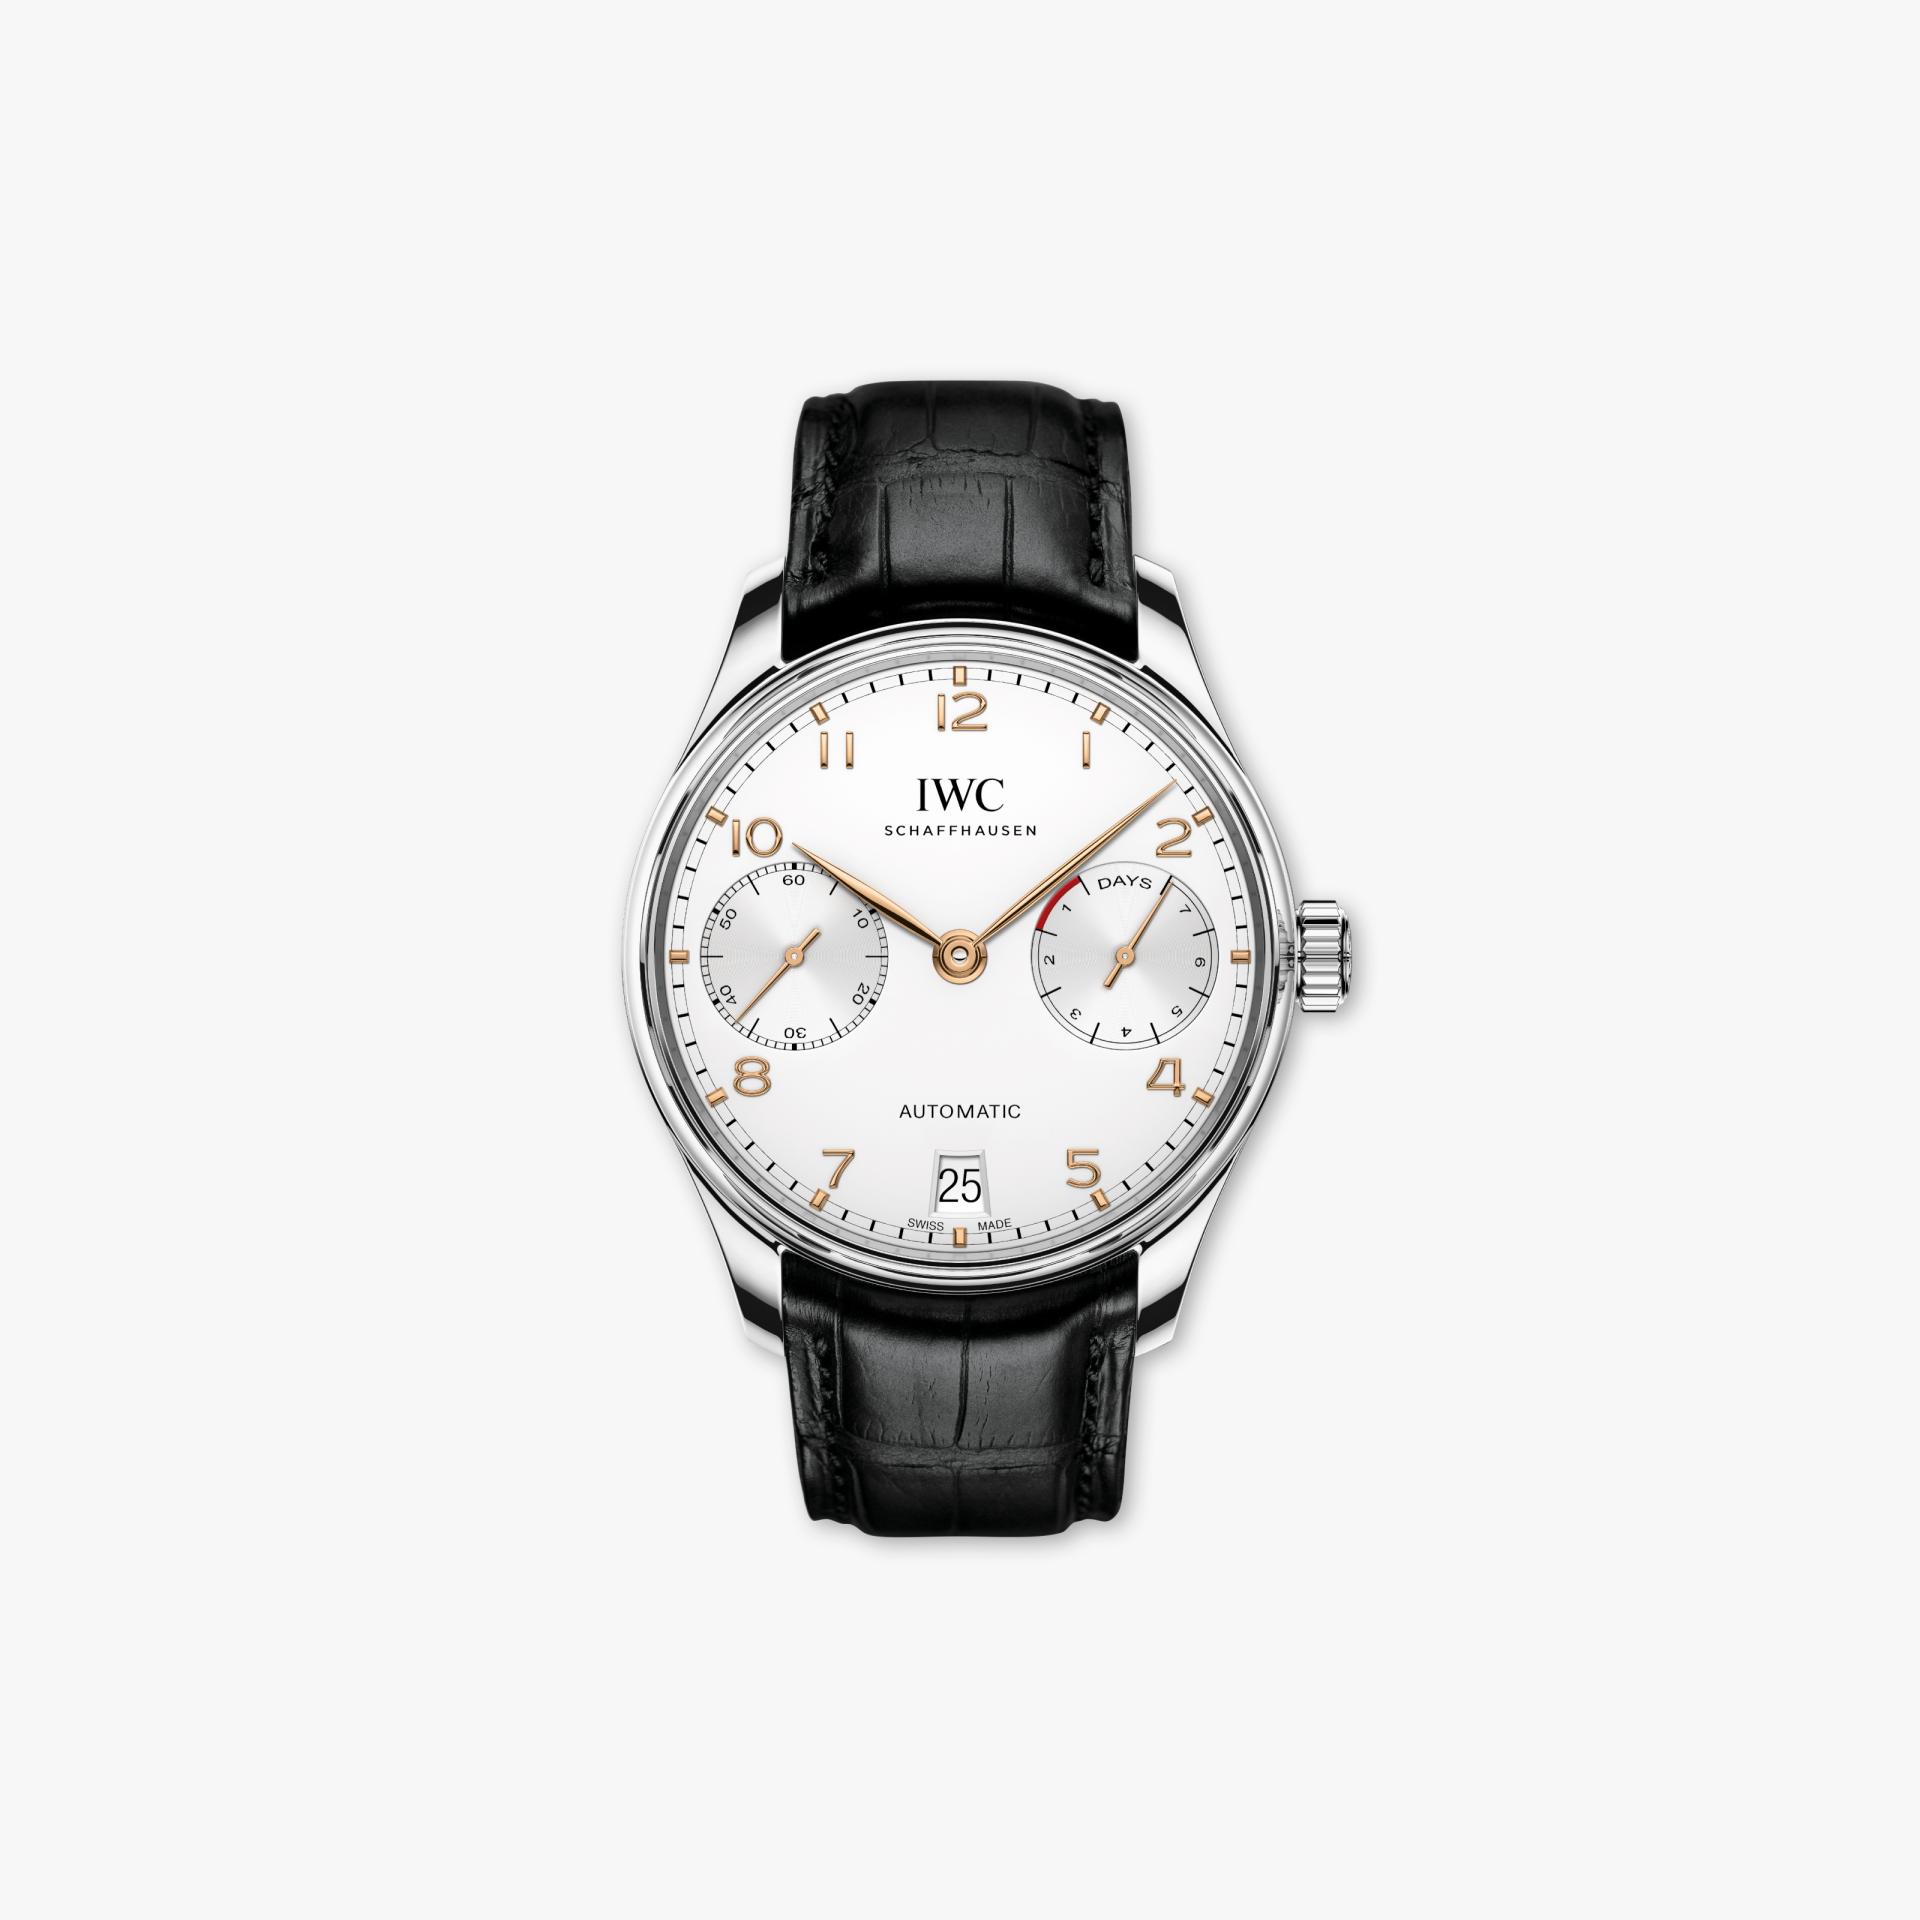 Portugieser Automatic made by IWC